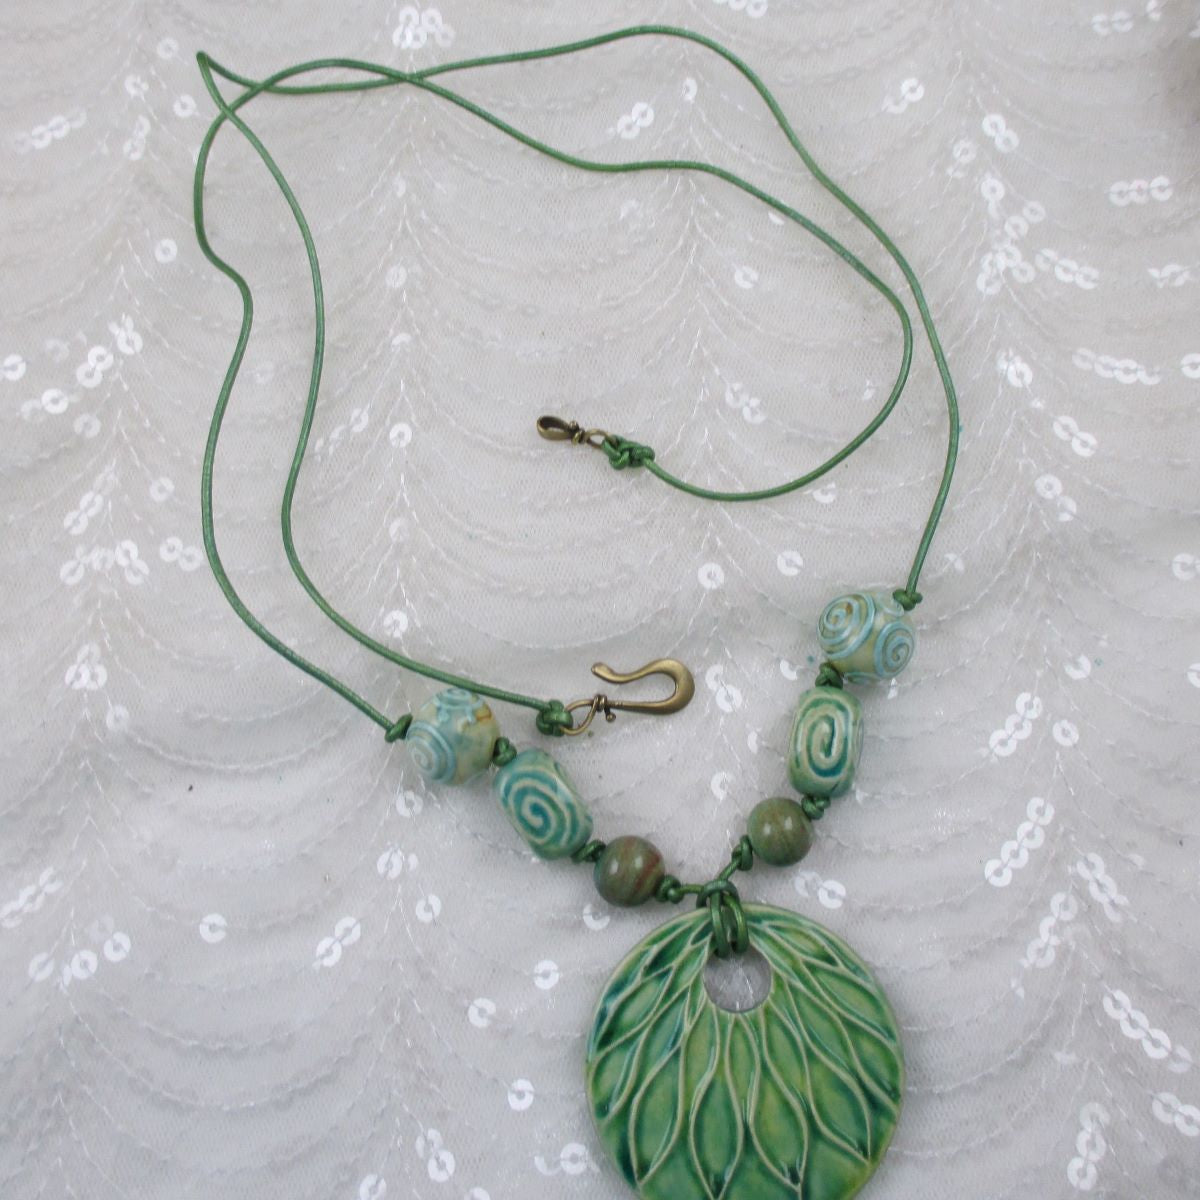 Green Pendant Necklace on Long Leather Cord - VP's Jewelry